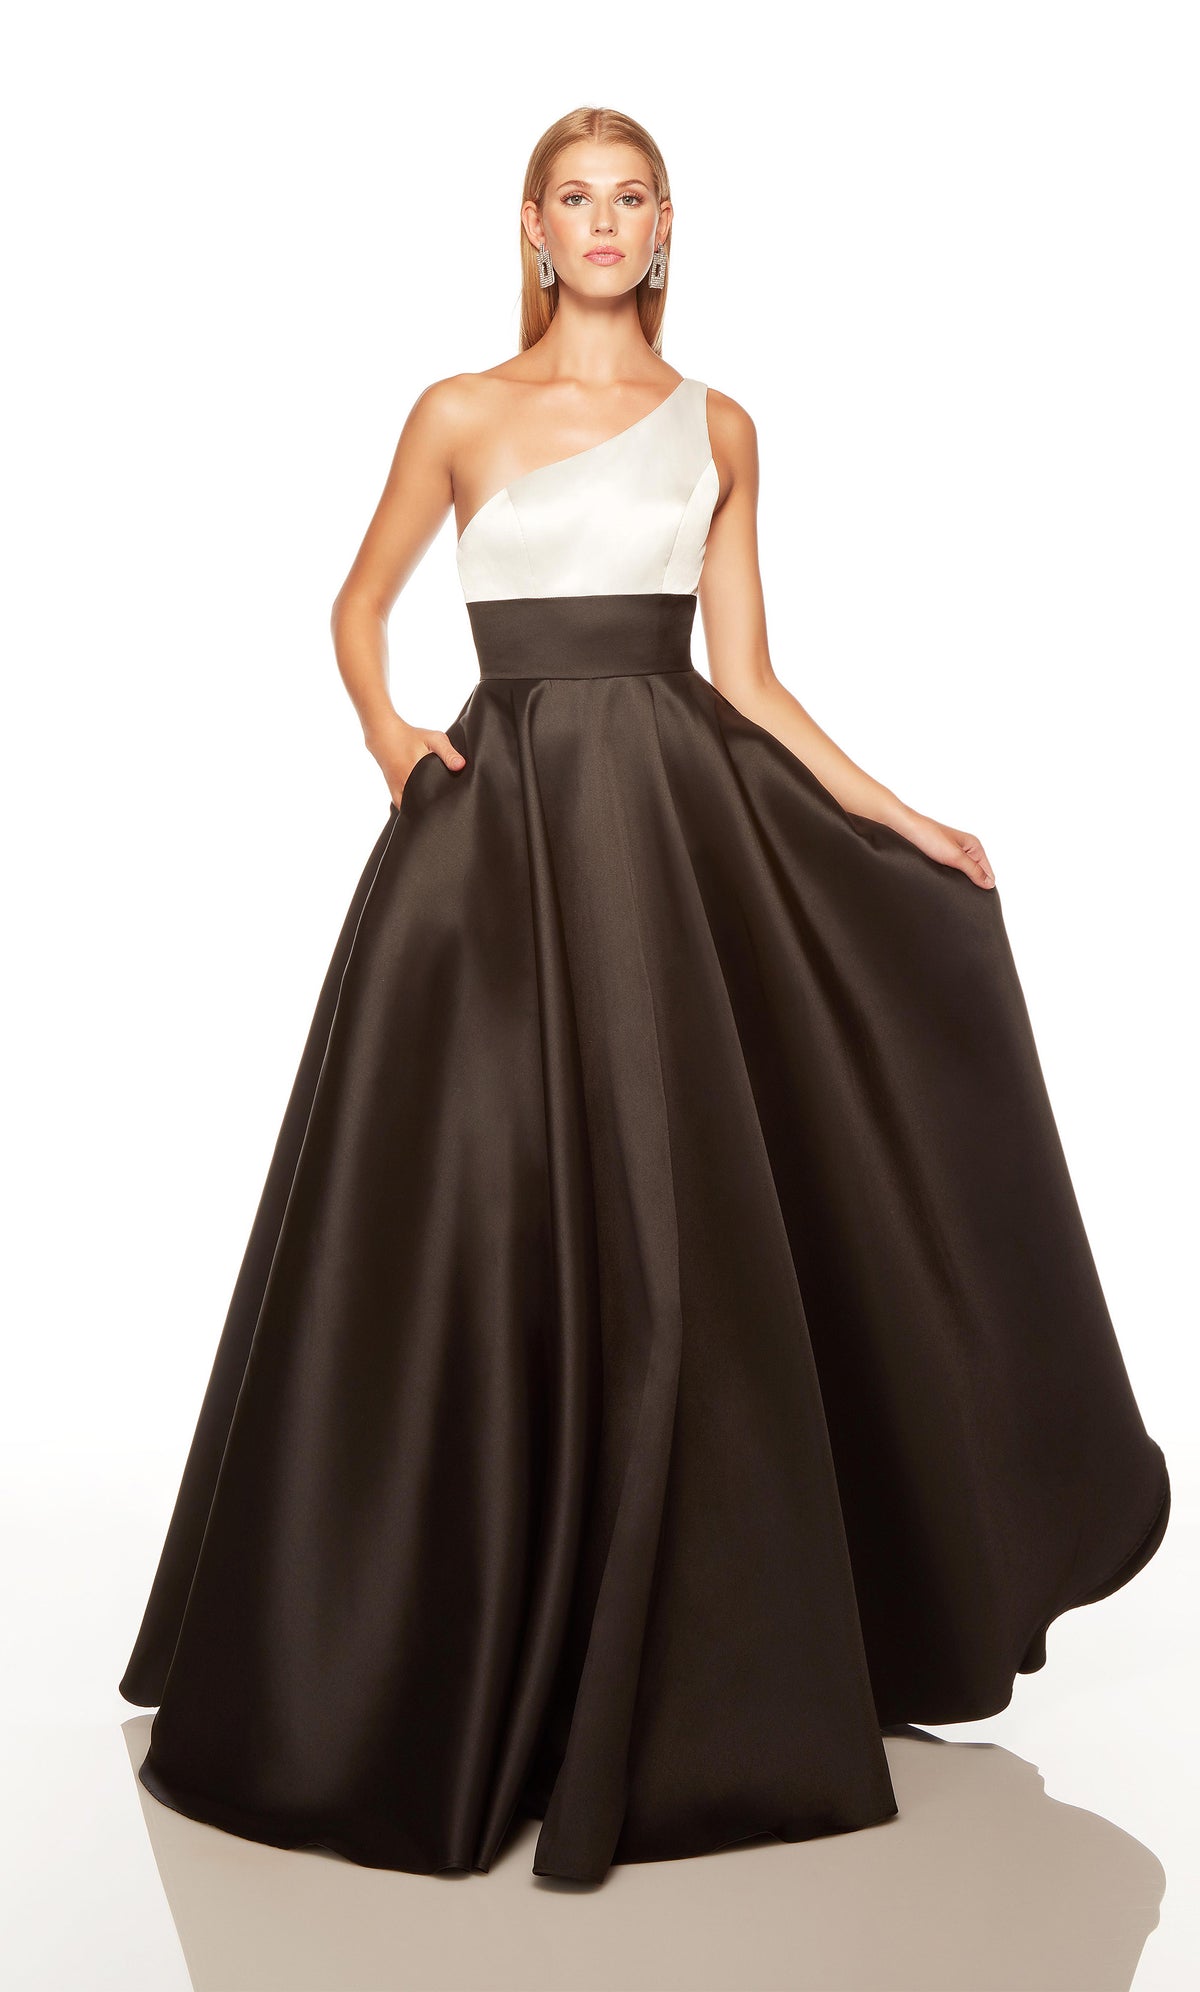 Black and white one shoulder prom dress with pockets. COLOR-SWATCH_1765__BLACK_DIAMOND-WHITE